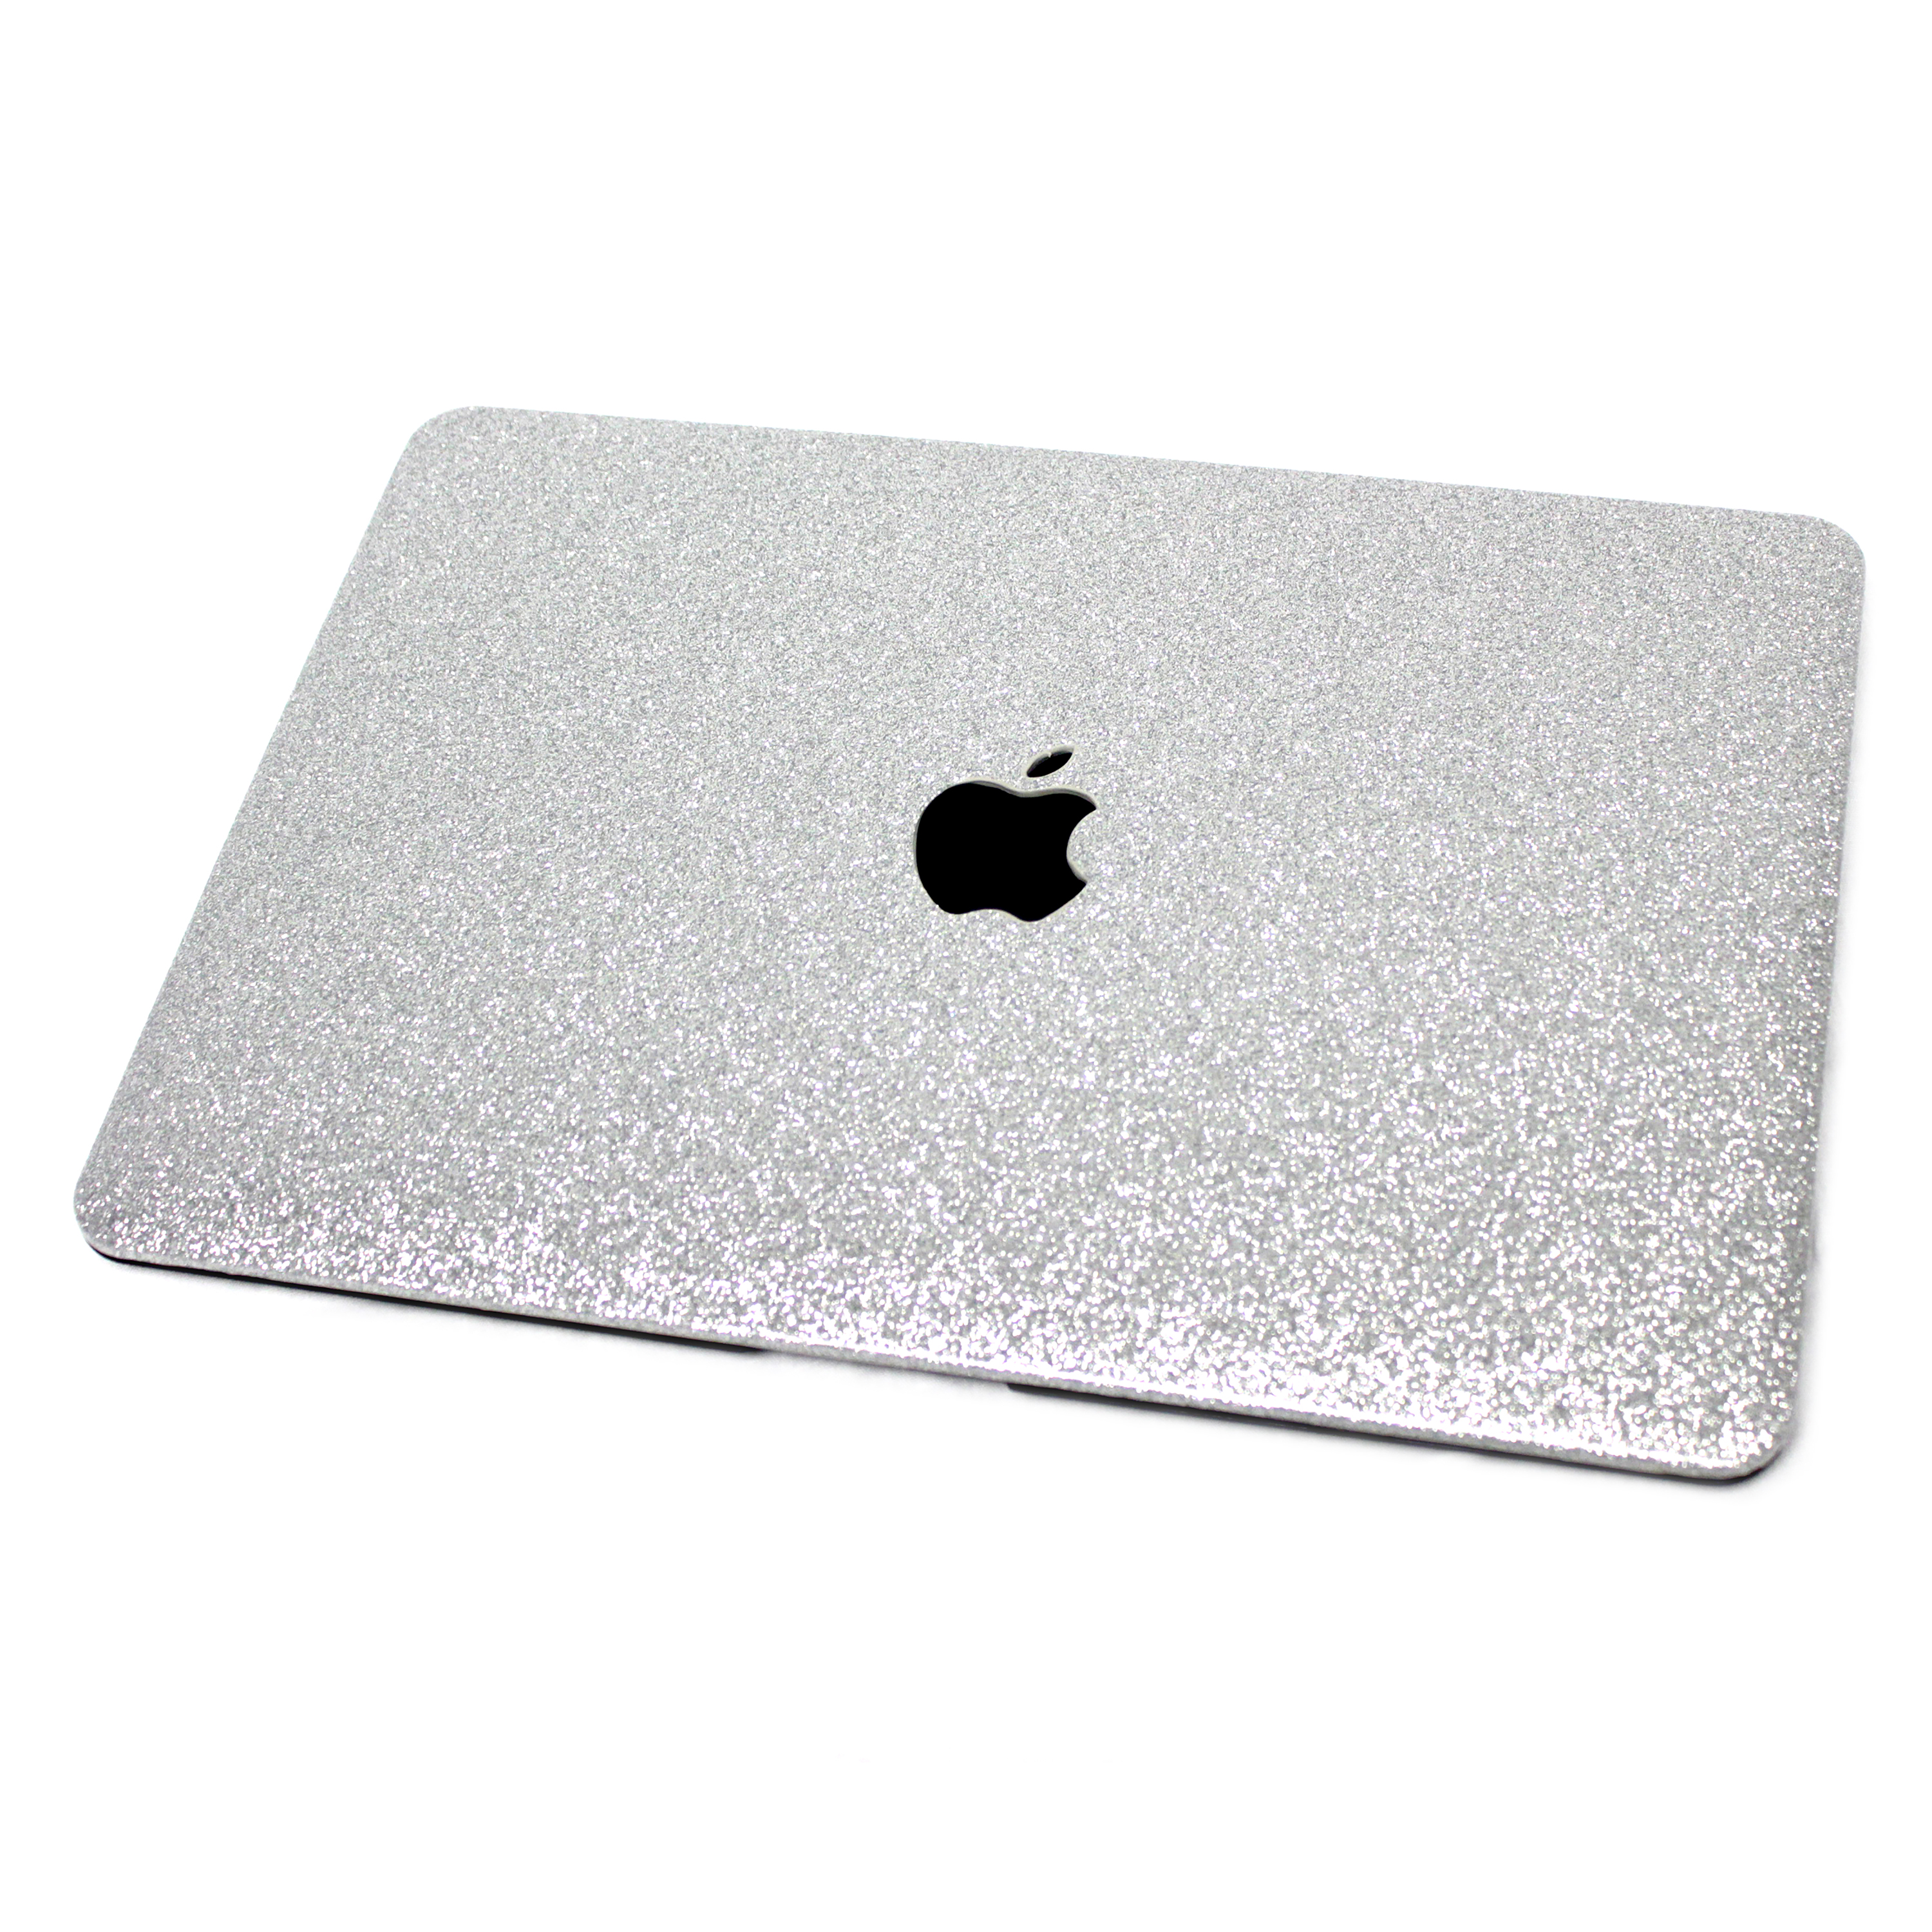 Model A1502/ A1425 Clear/Crystal Protective Plastic Hard Shell Laptop Cover Case for Apple 13-inch MacBook Pro 13.3 with Retina Display